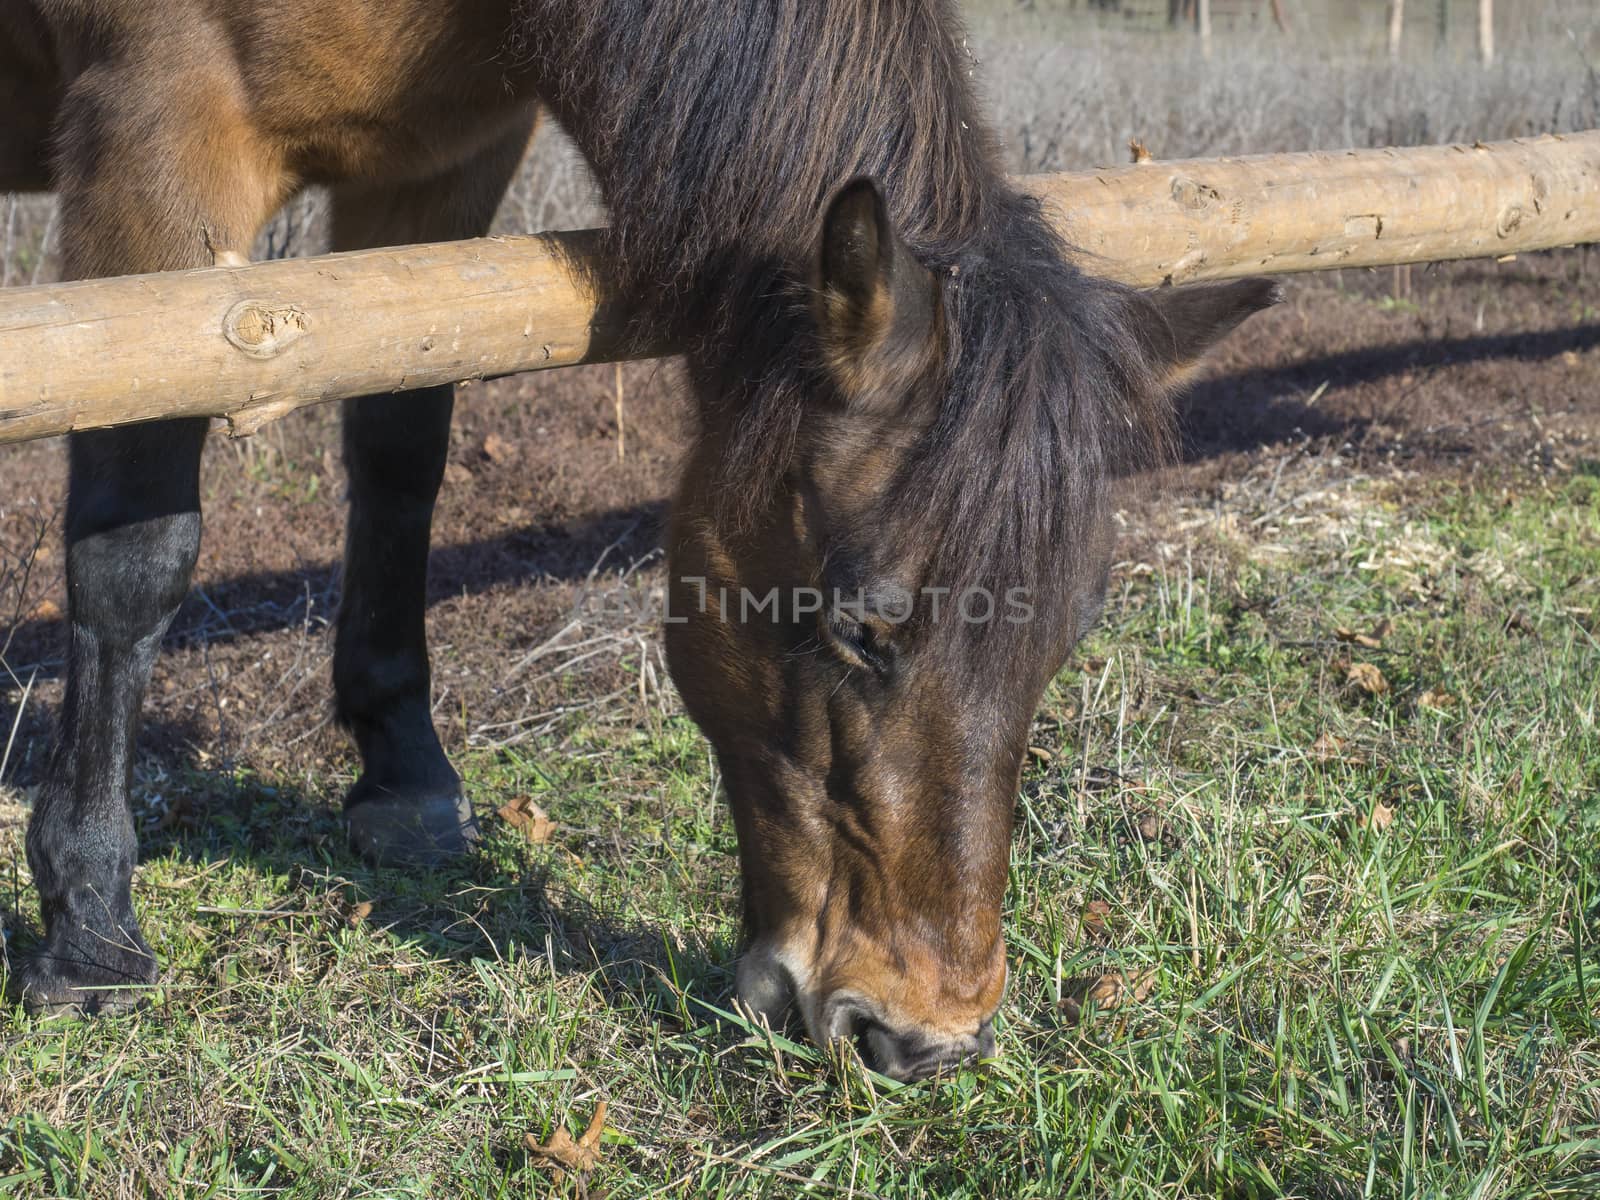 cllose up head of ginger brown horse eating grass on meadow in early spring in Prague park, focus on eye. by Henkeova